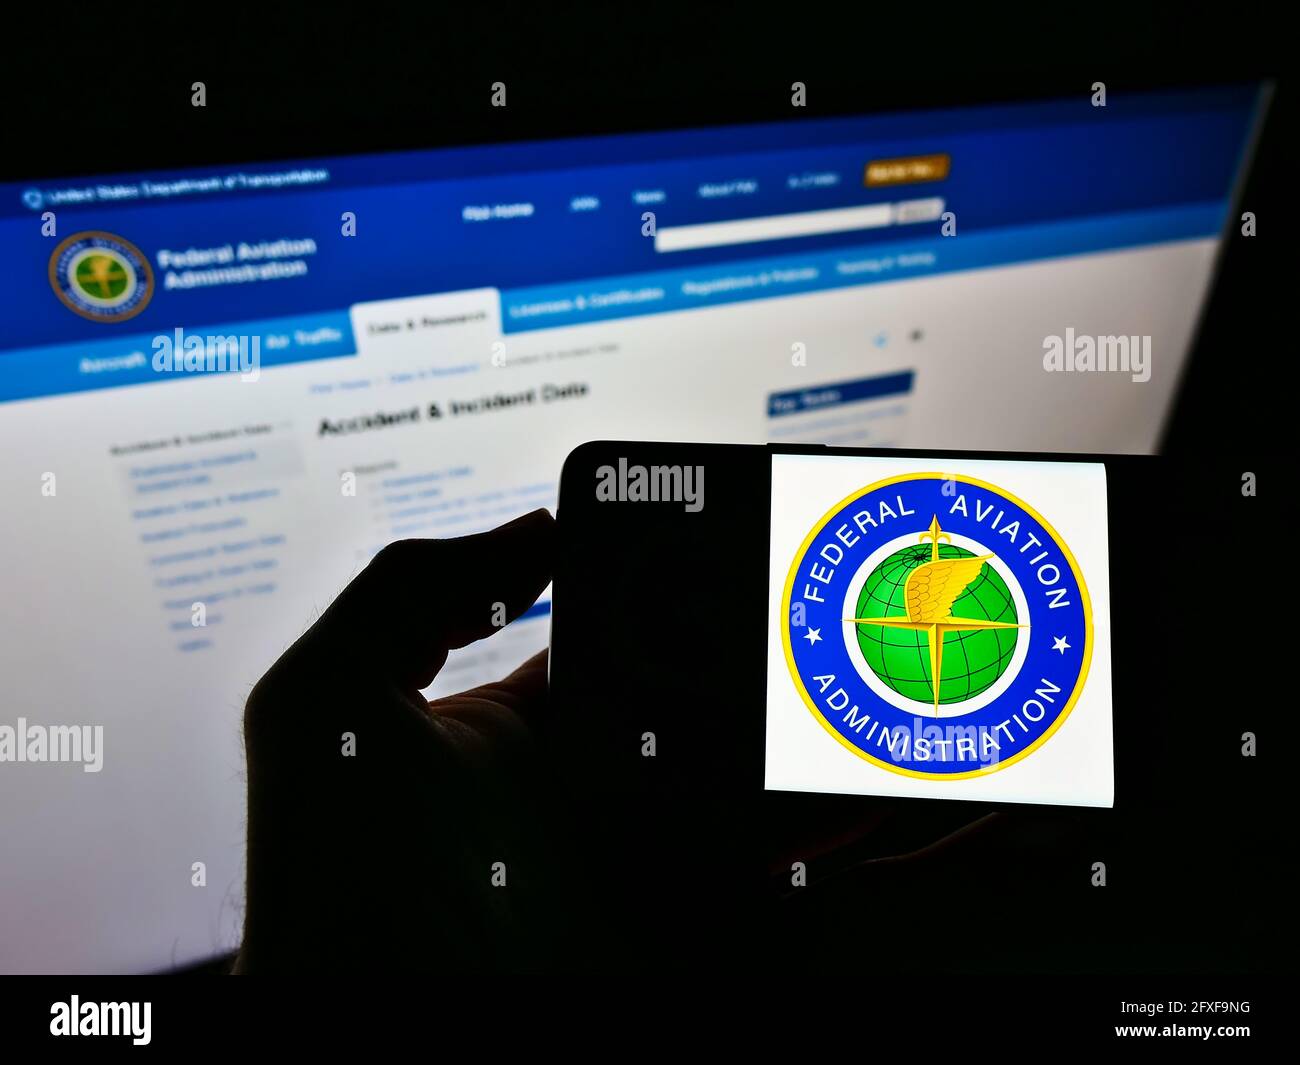 Person holding smartphone with seal of US agency Federal Aviation Administration (FAA) on screen in front of website. Focus on phone display. Stock Photo